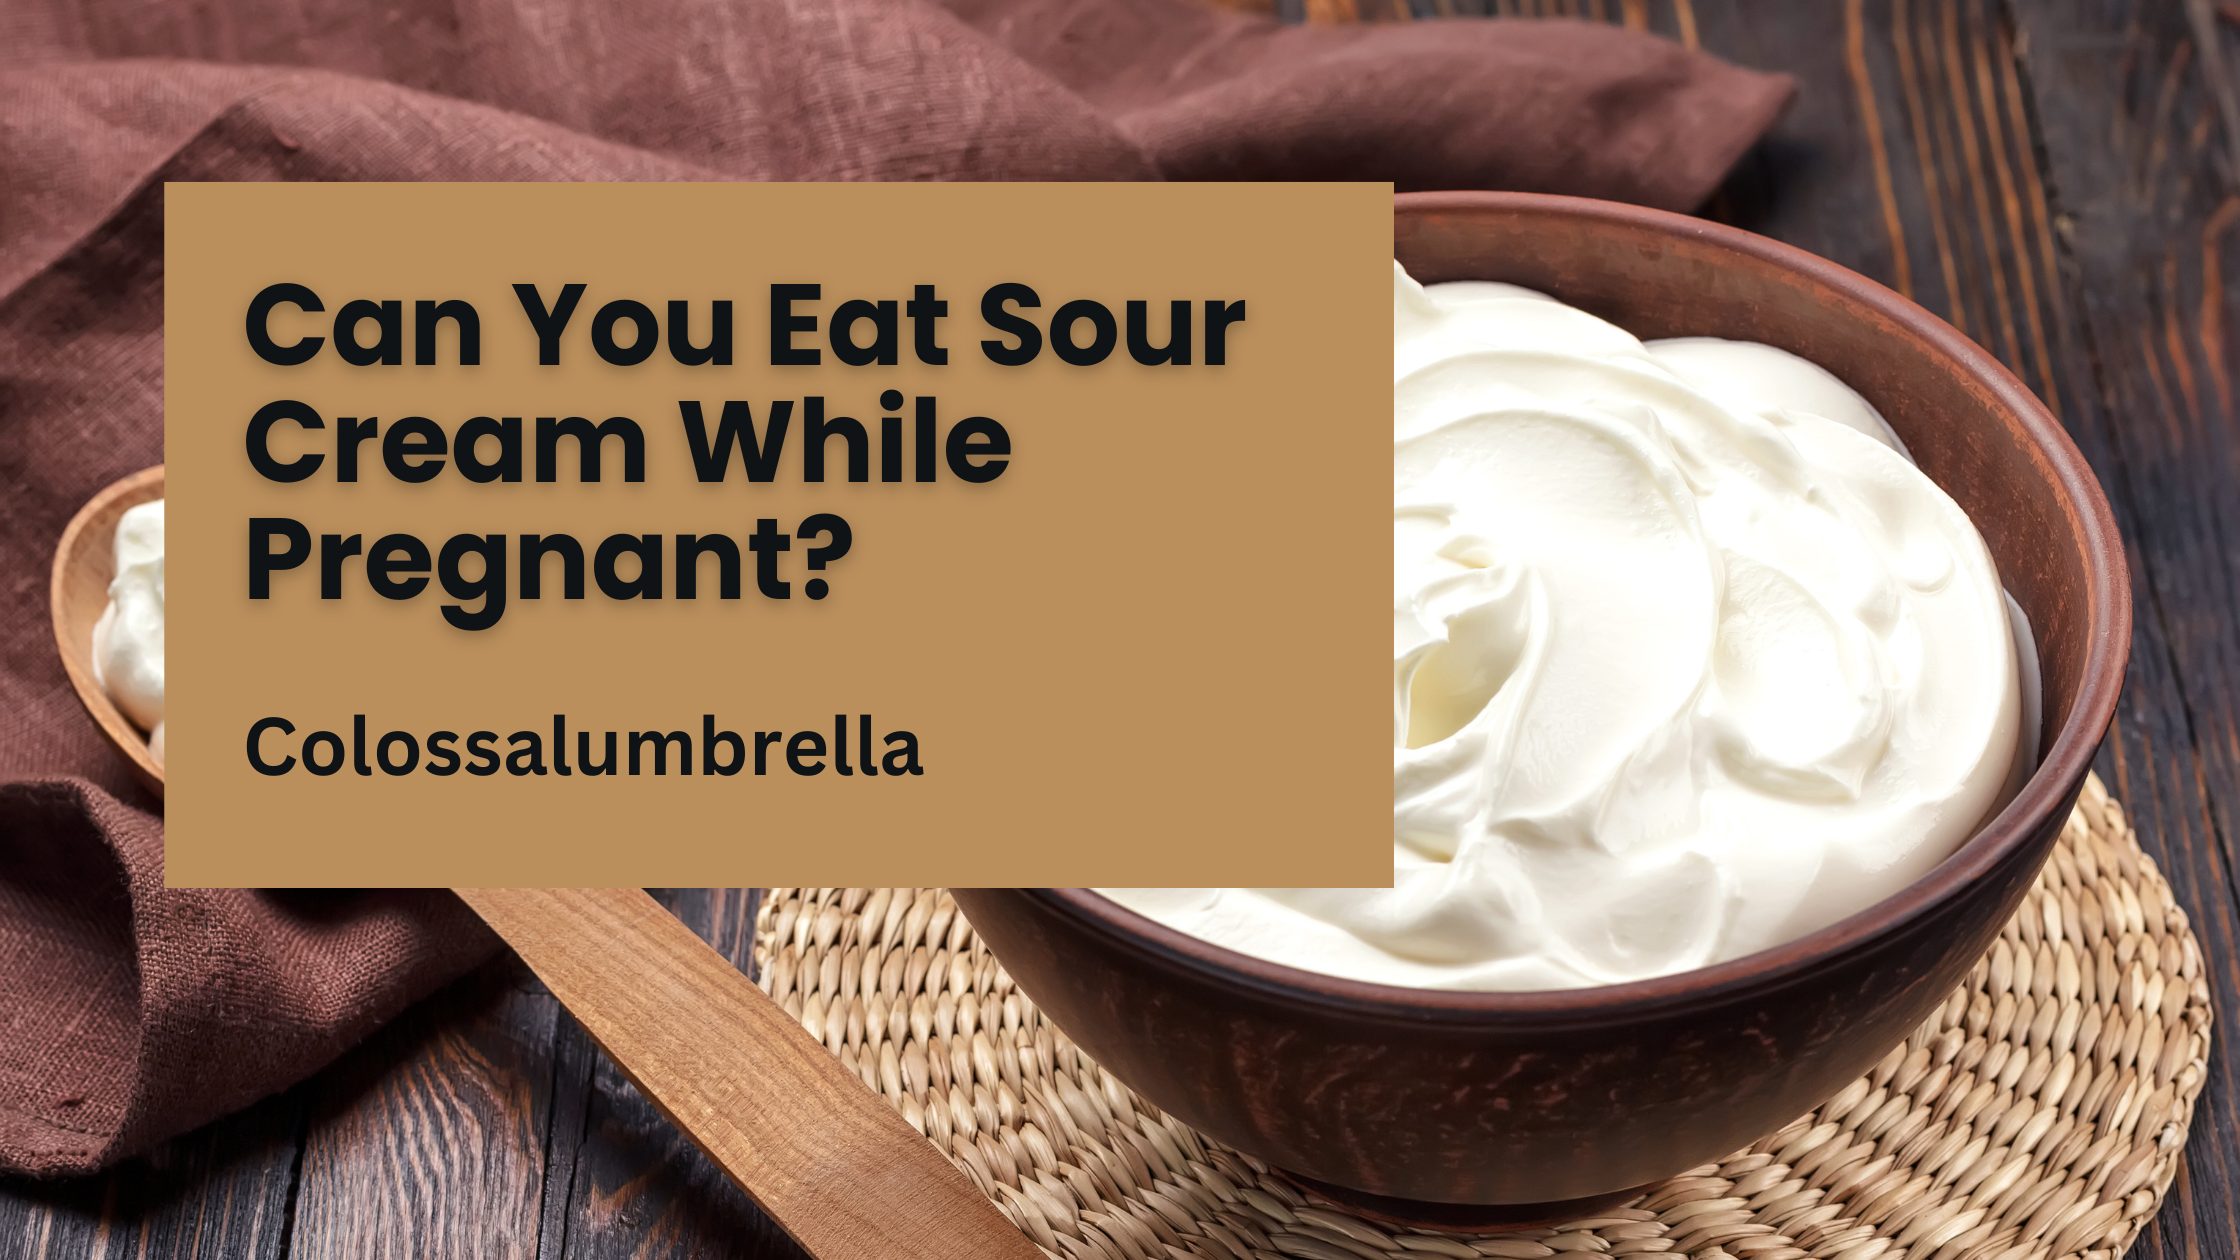 Can You Eat Sour Cream While Pregnant? – Truth Revealed